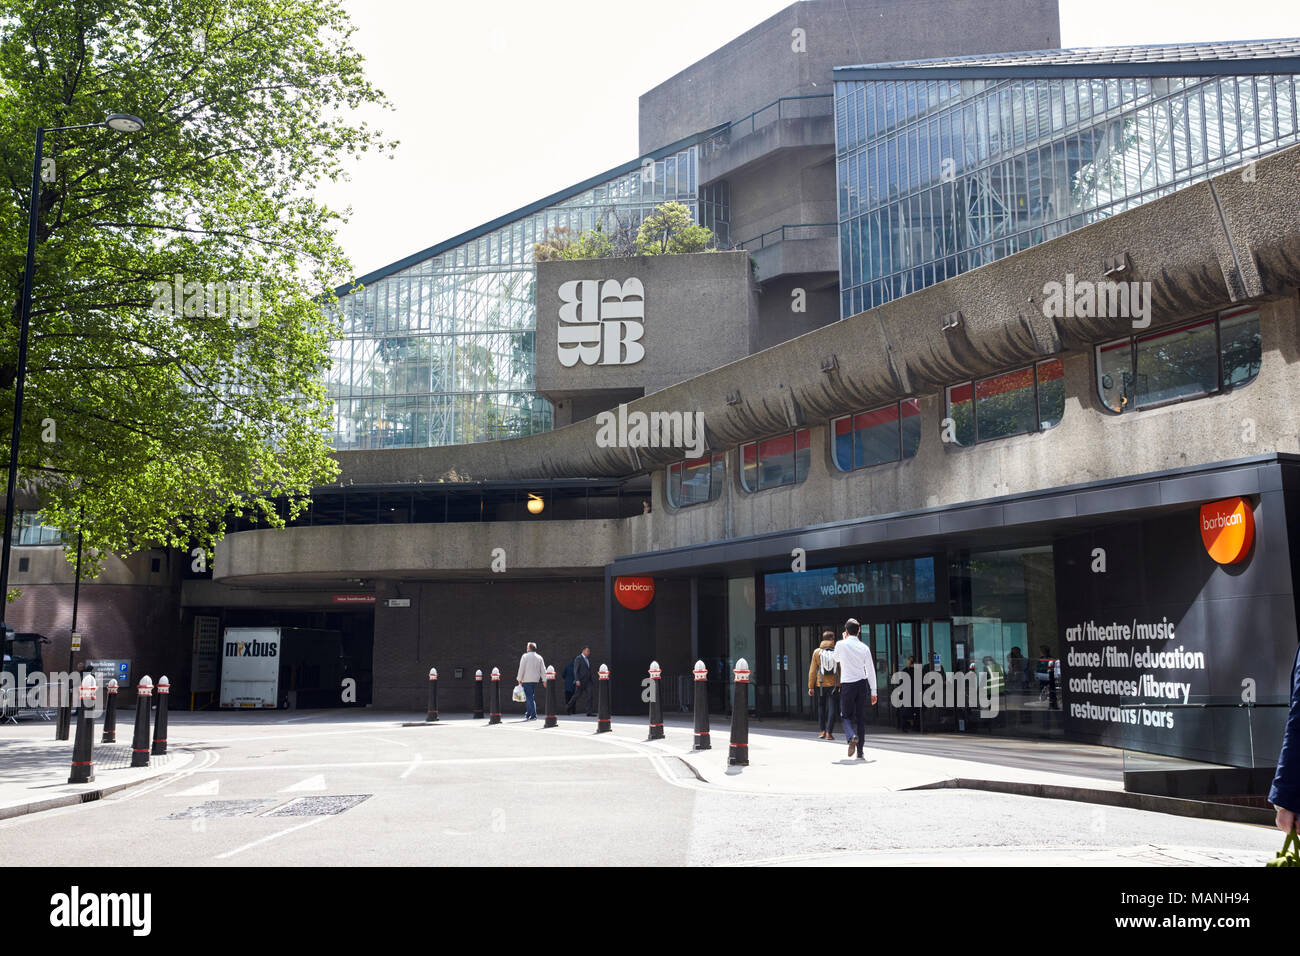 LONDON - MAY, 2017: Entrance to the Barbican Centre, Silk Street, London EC2 Stock Photo